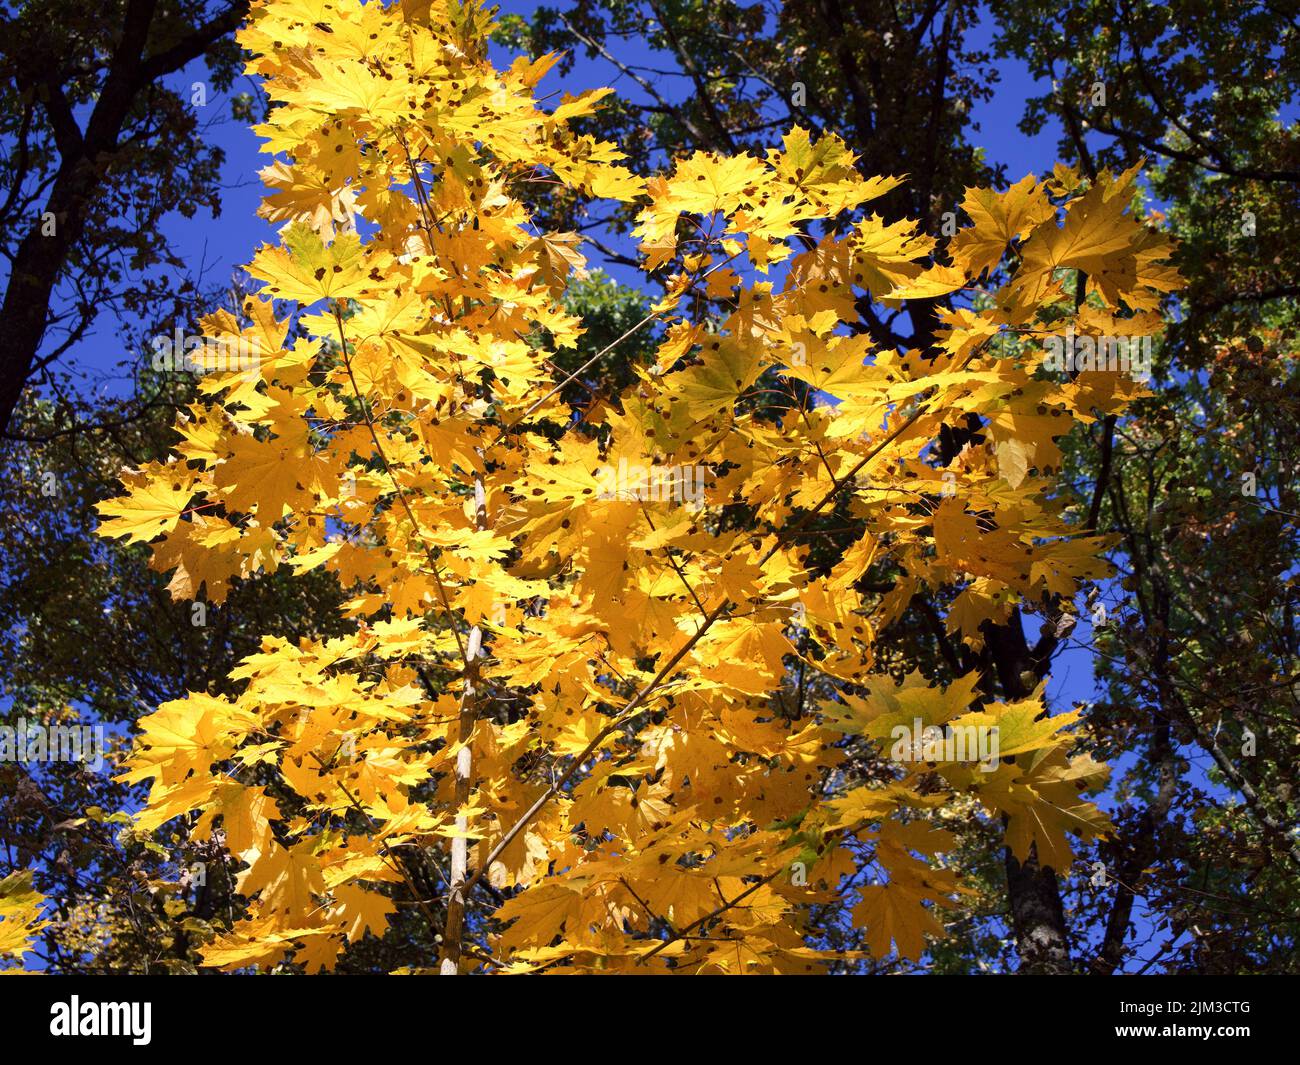 Yellowed maple leaves against a blue sky. Autumn foliage. Stock Photo